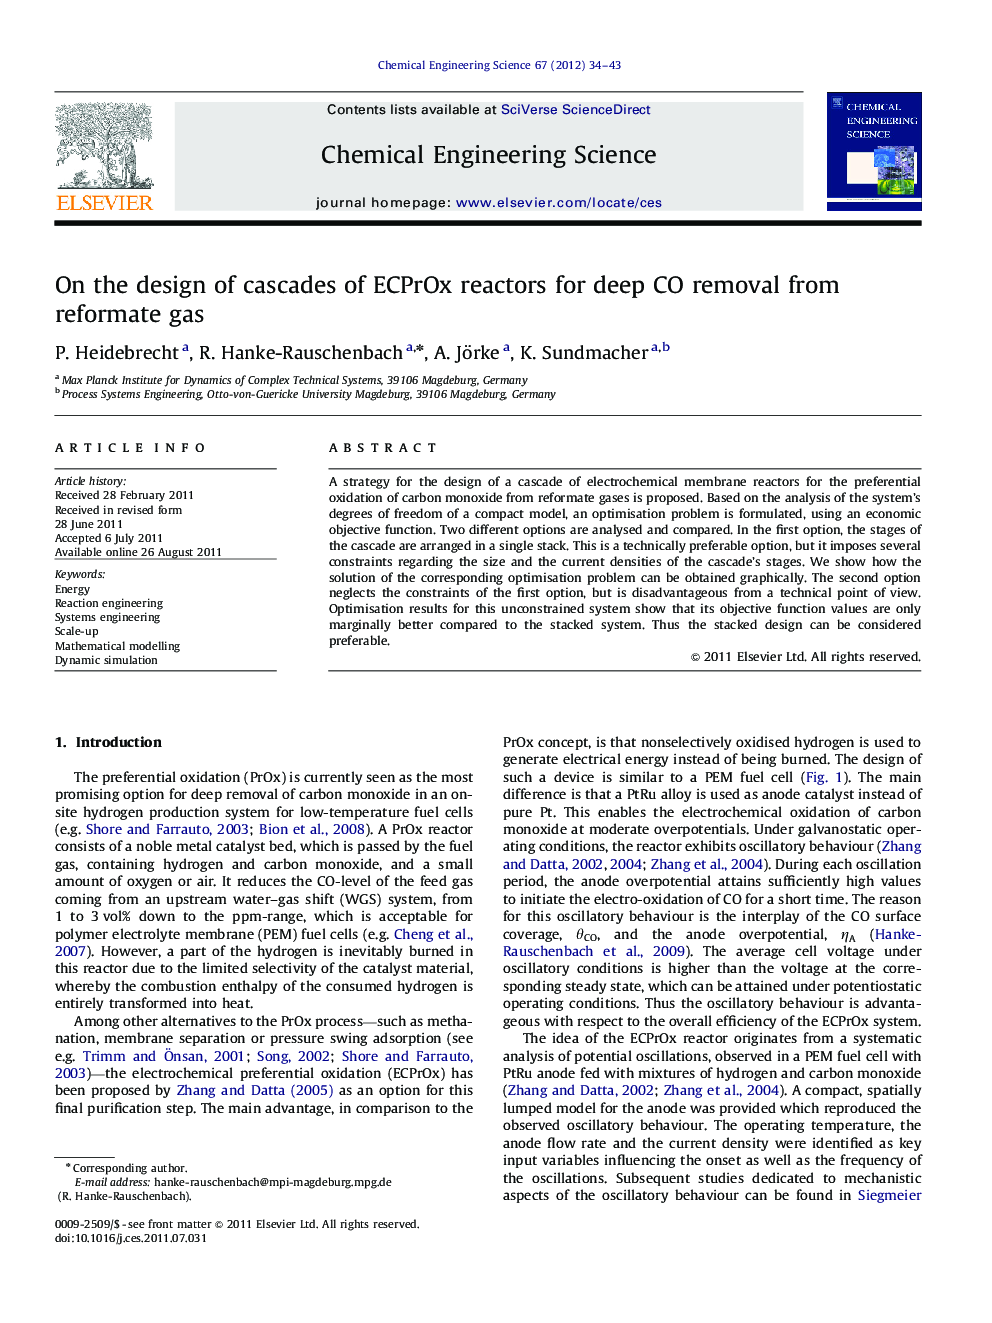 On the design of cascades of ECPrOx reactors for deep CO removal from reformate gas